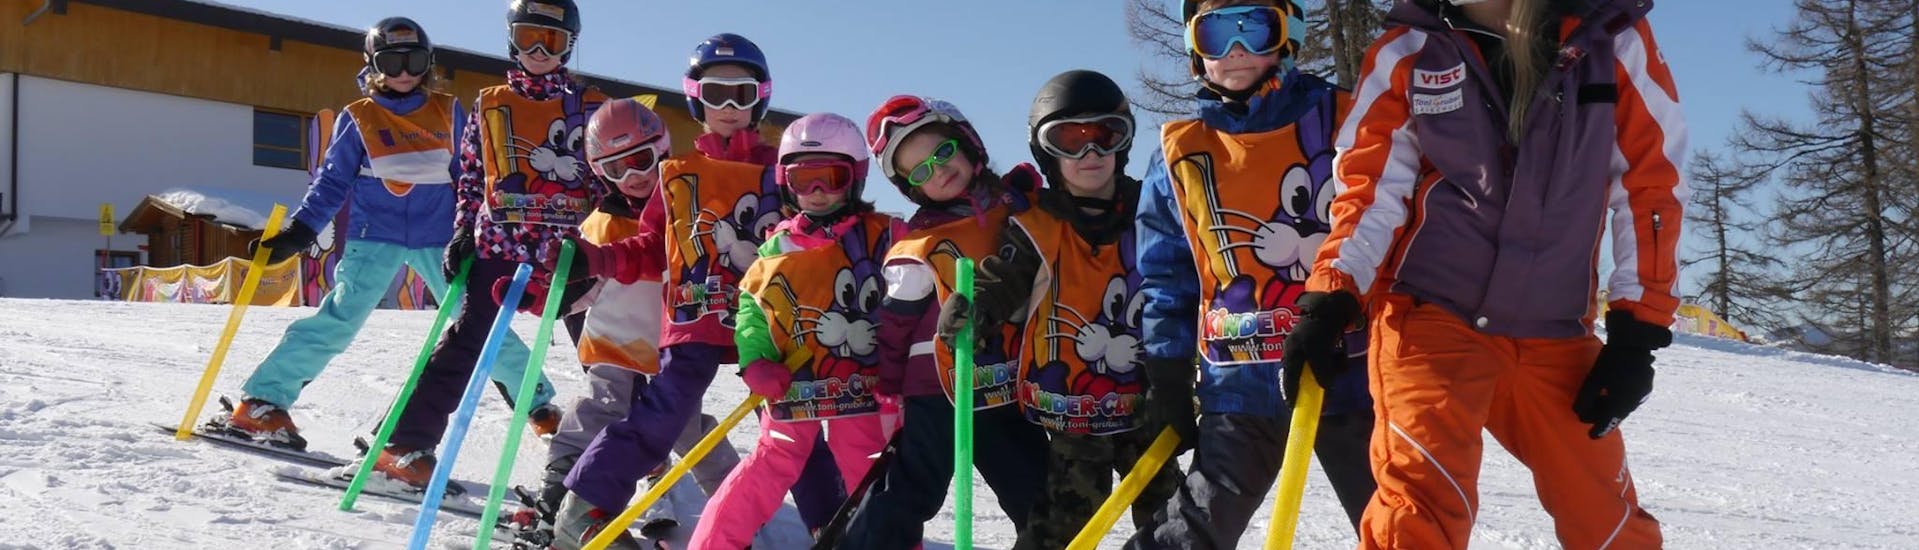 Kids Ski Lessons (4-14 y.) for All Levels - Half Day from Skischule Toni Gruber.